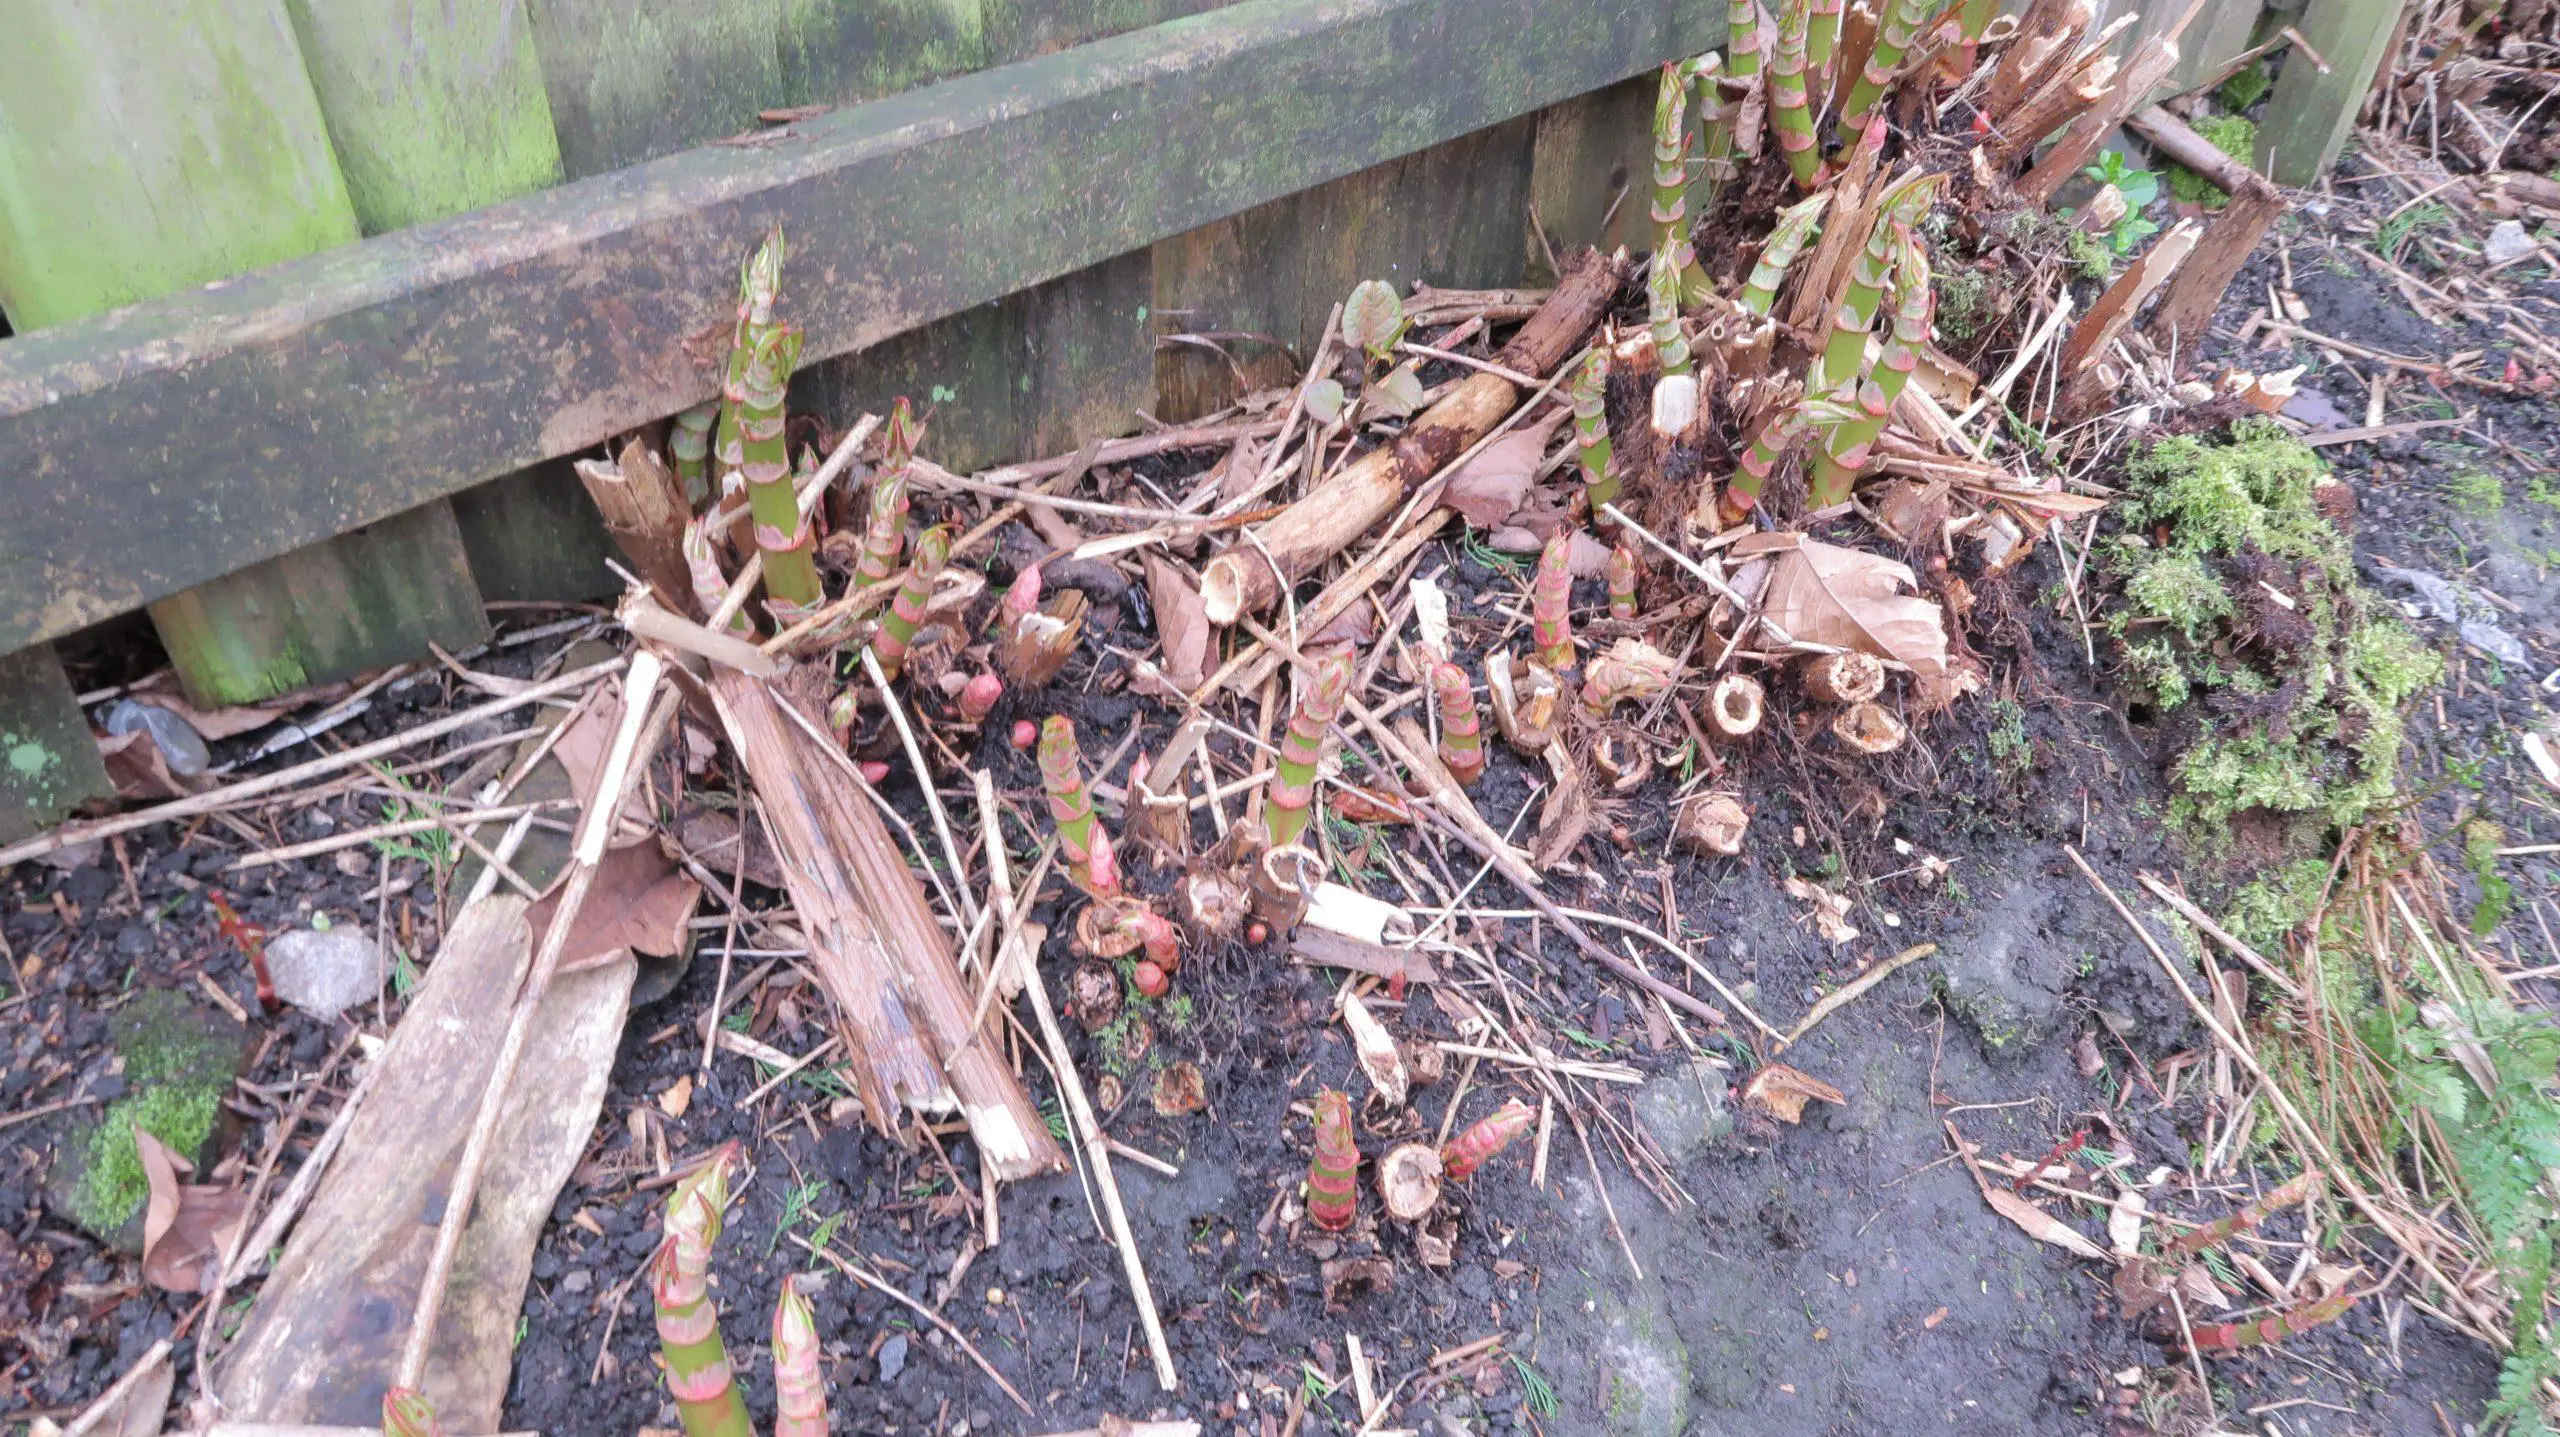 Identifying Japanese knotweed crowns includes new growth of shoots combined with the old debris from dead stems